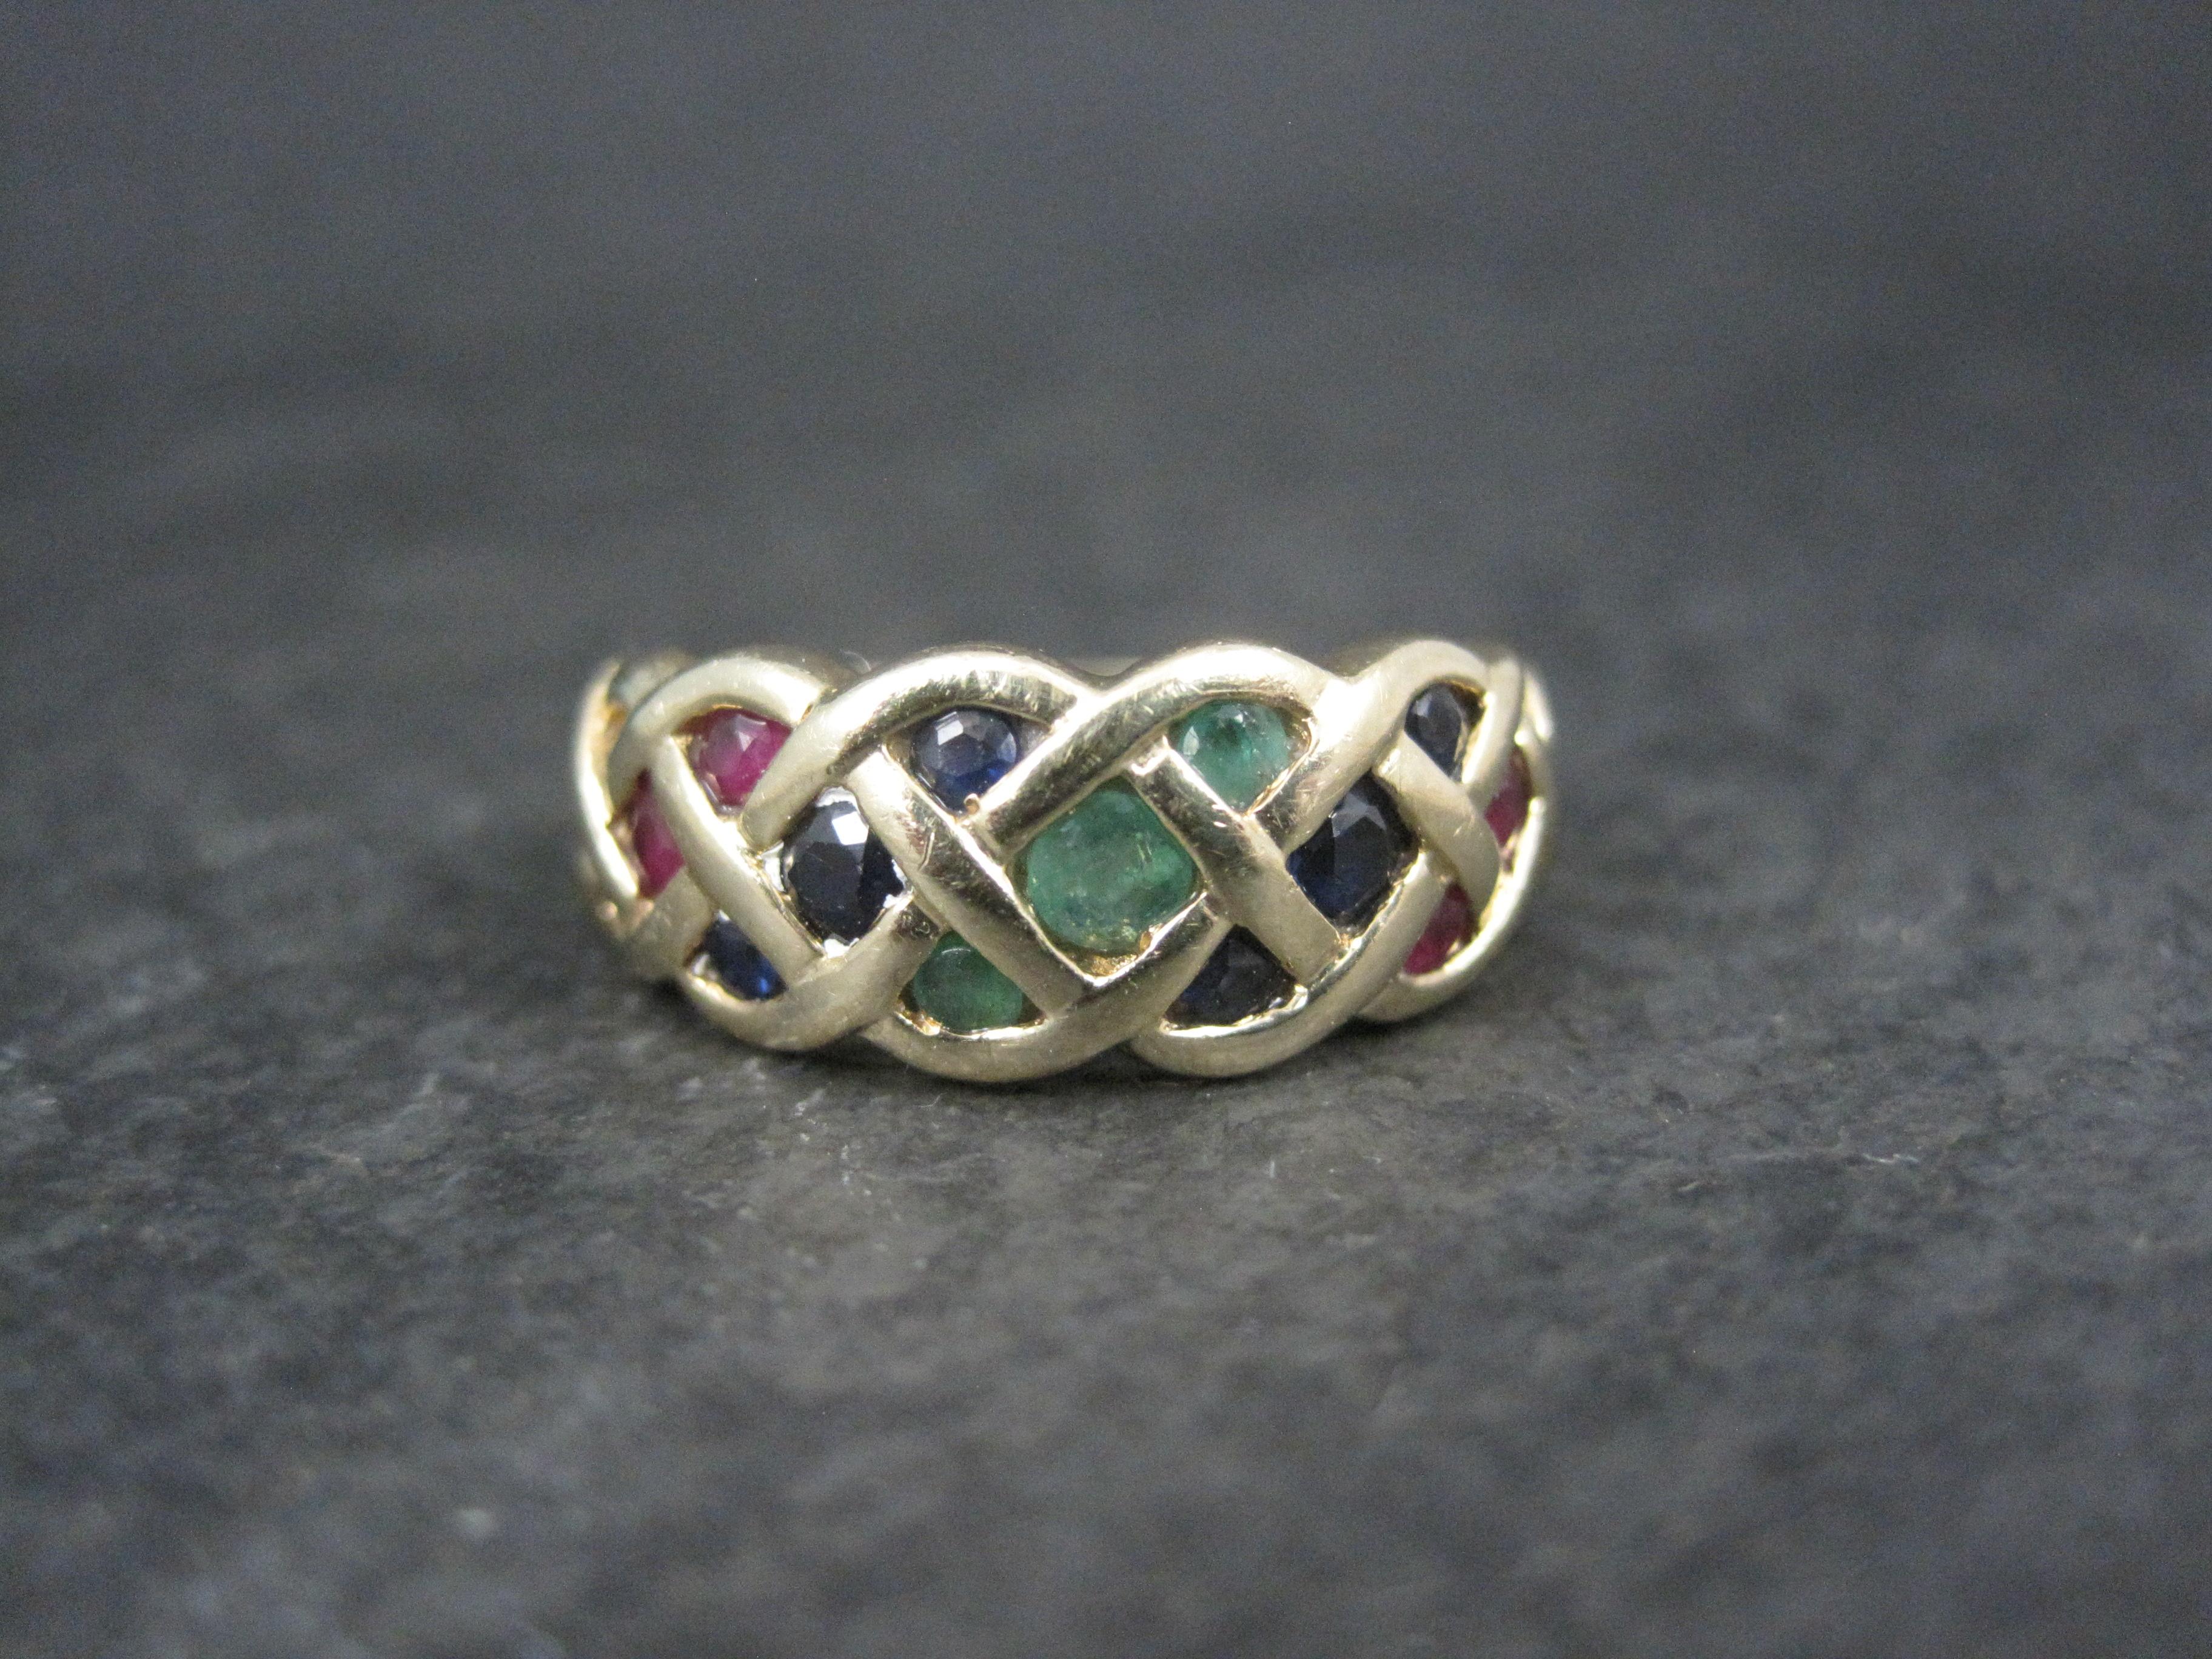 This beautiful estate ring is 14k yellow gold with sapphires, rubies and emerald gemstones.

The face of this ring measures 5/16 of an inch north to south.
Size: 7

Marks: 14K

Condition: Excellent